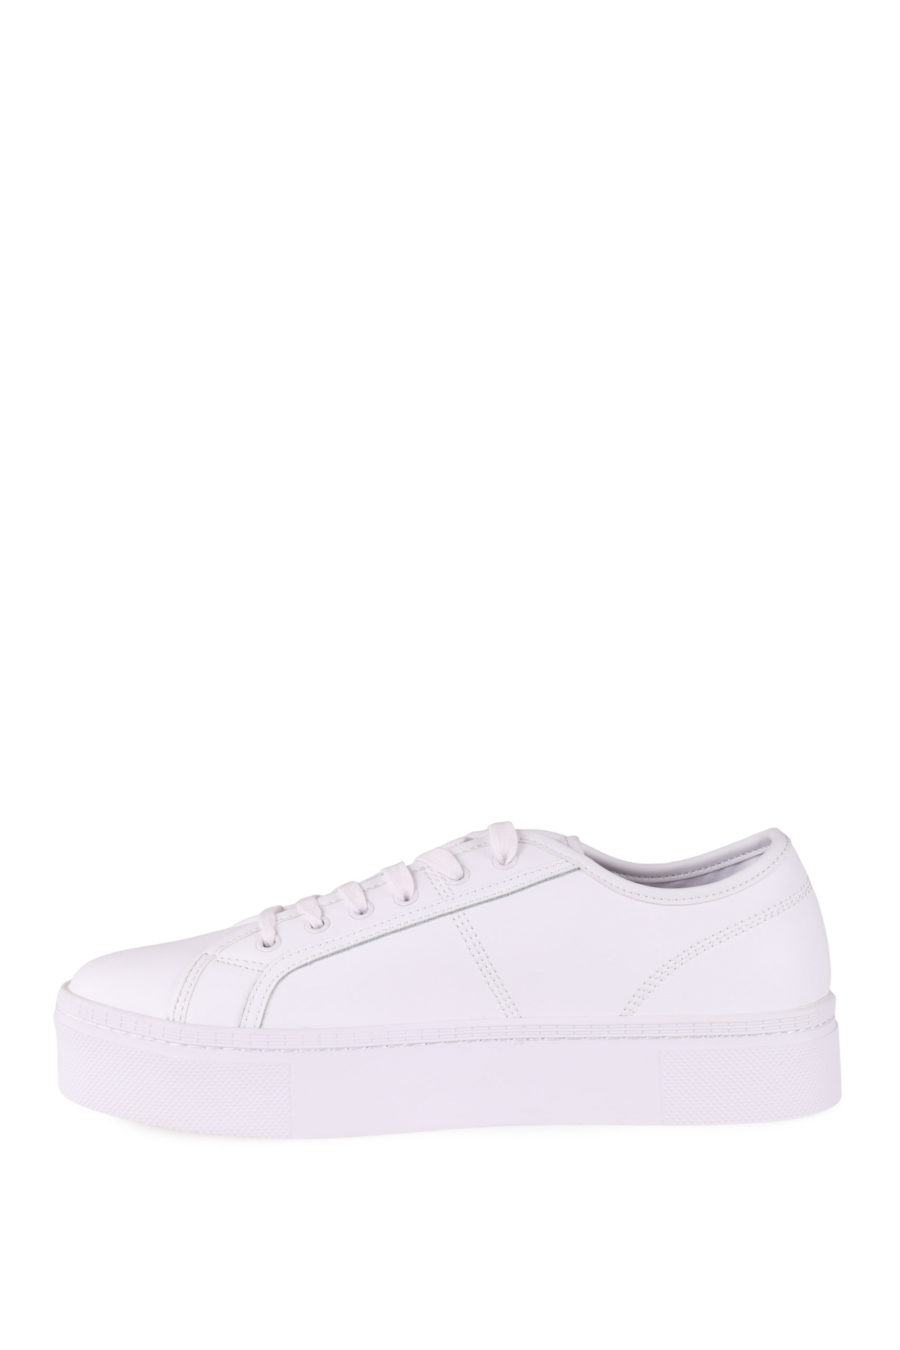 Zapatillas Versace Jeans Couture blancas con suela con logotipo - (Duplicate Imported from WooCommerce) - IMG 0441 scaled